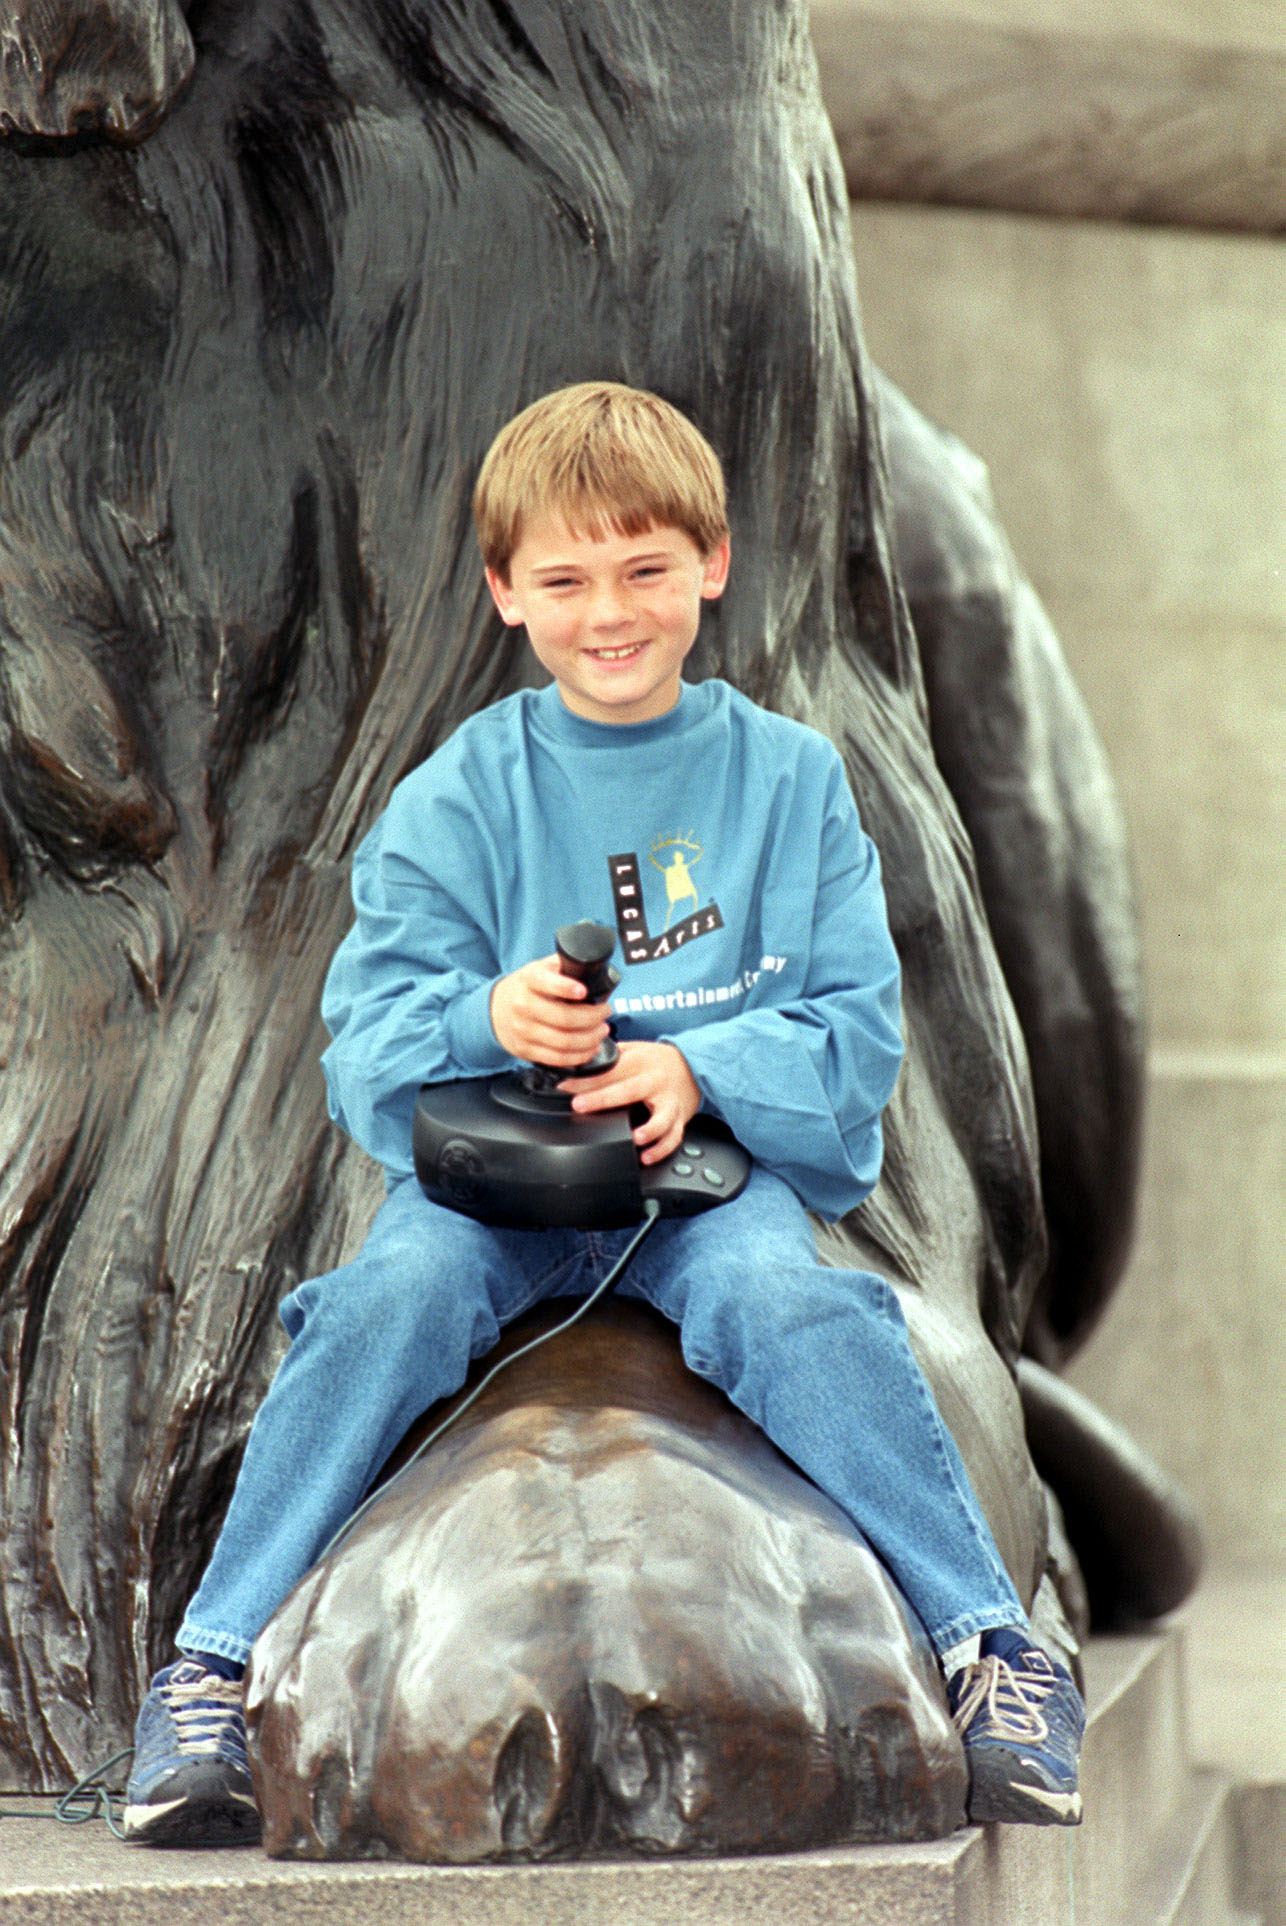 Jake Lloyd at a photocall in Trafalgar Square, London, England | Source: Getty images